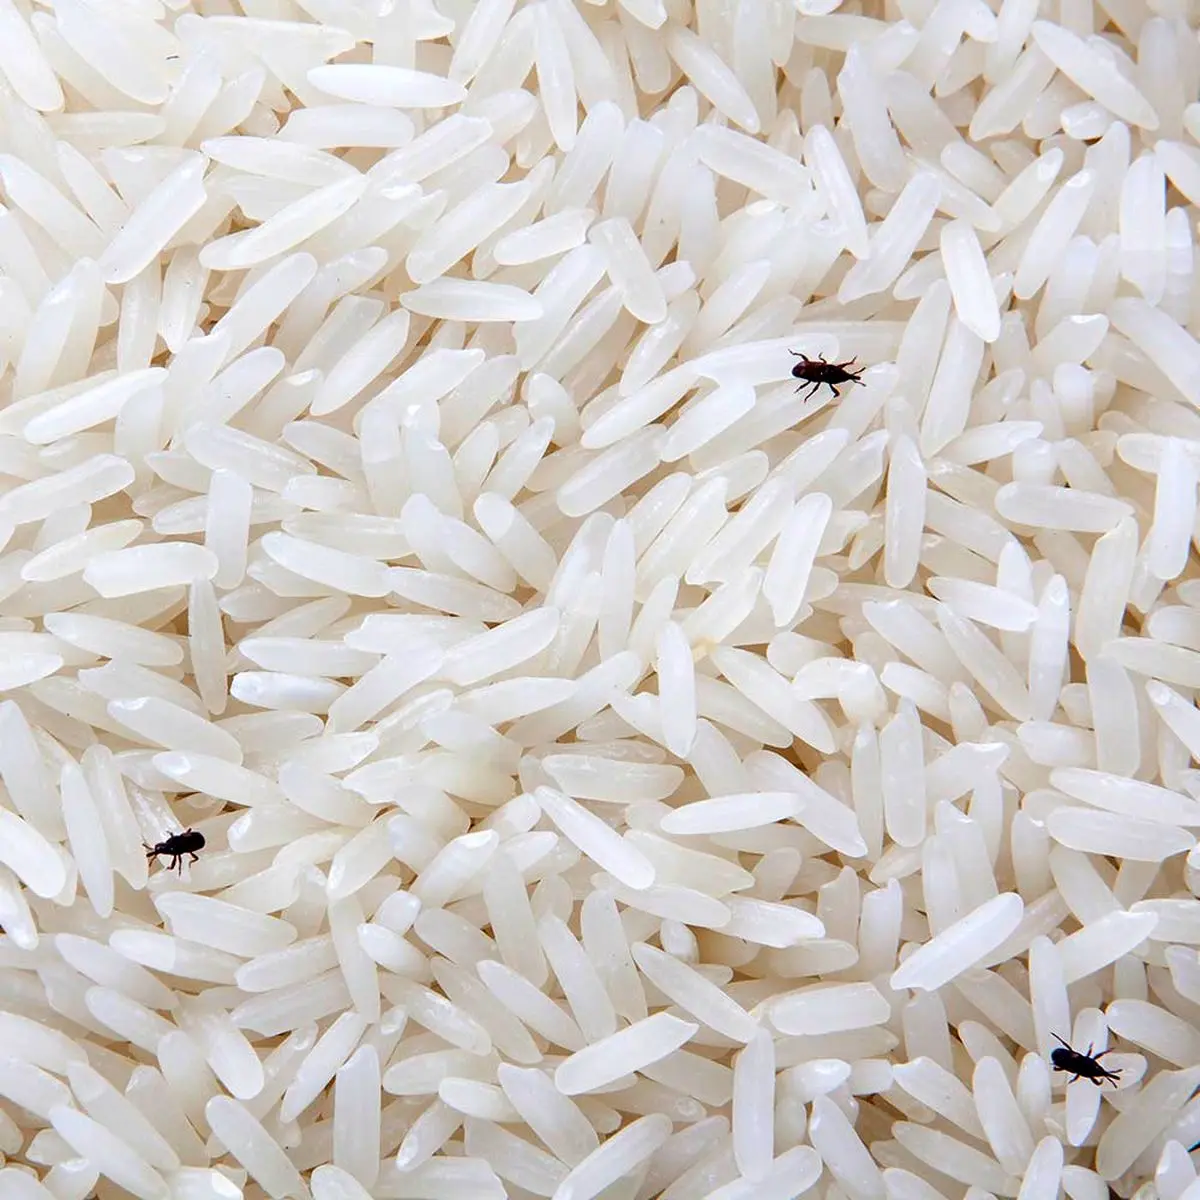 Insects-in-rice